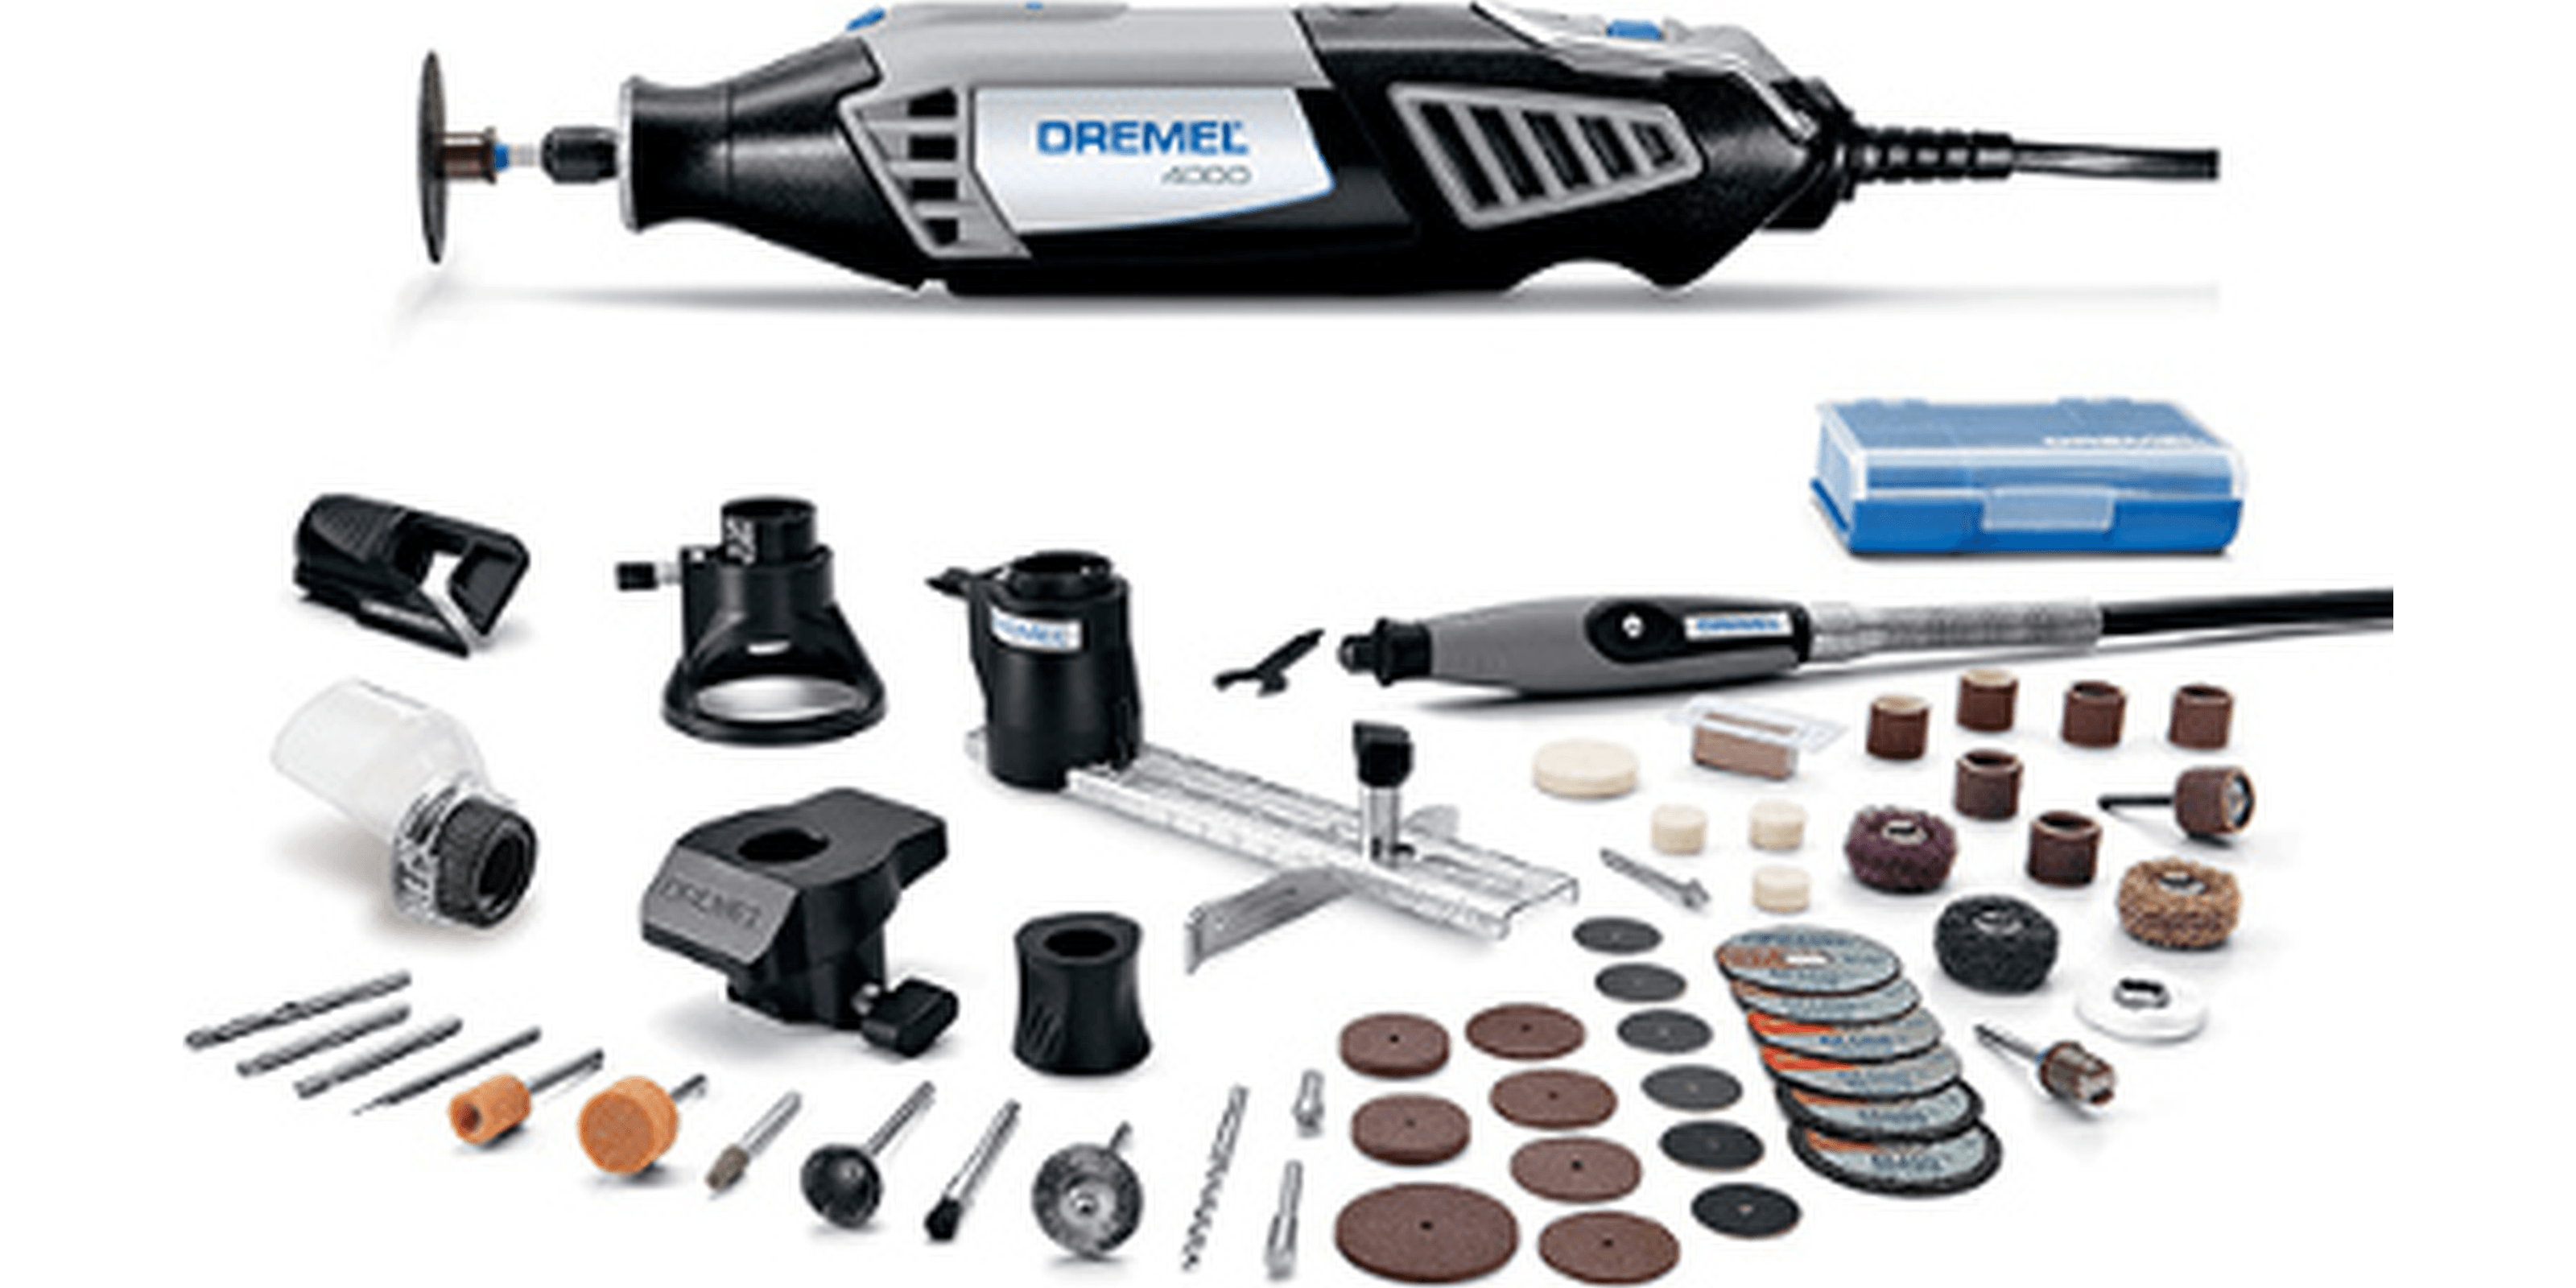 Dremel High Performance Rotary Tool Kit with Flex Shaft Attachment